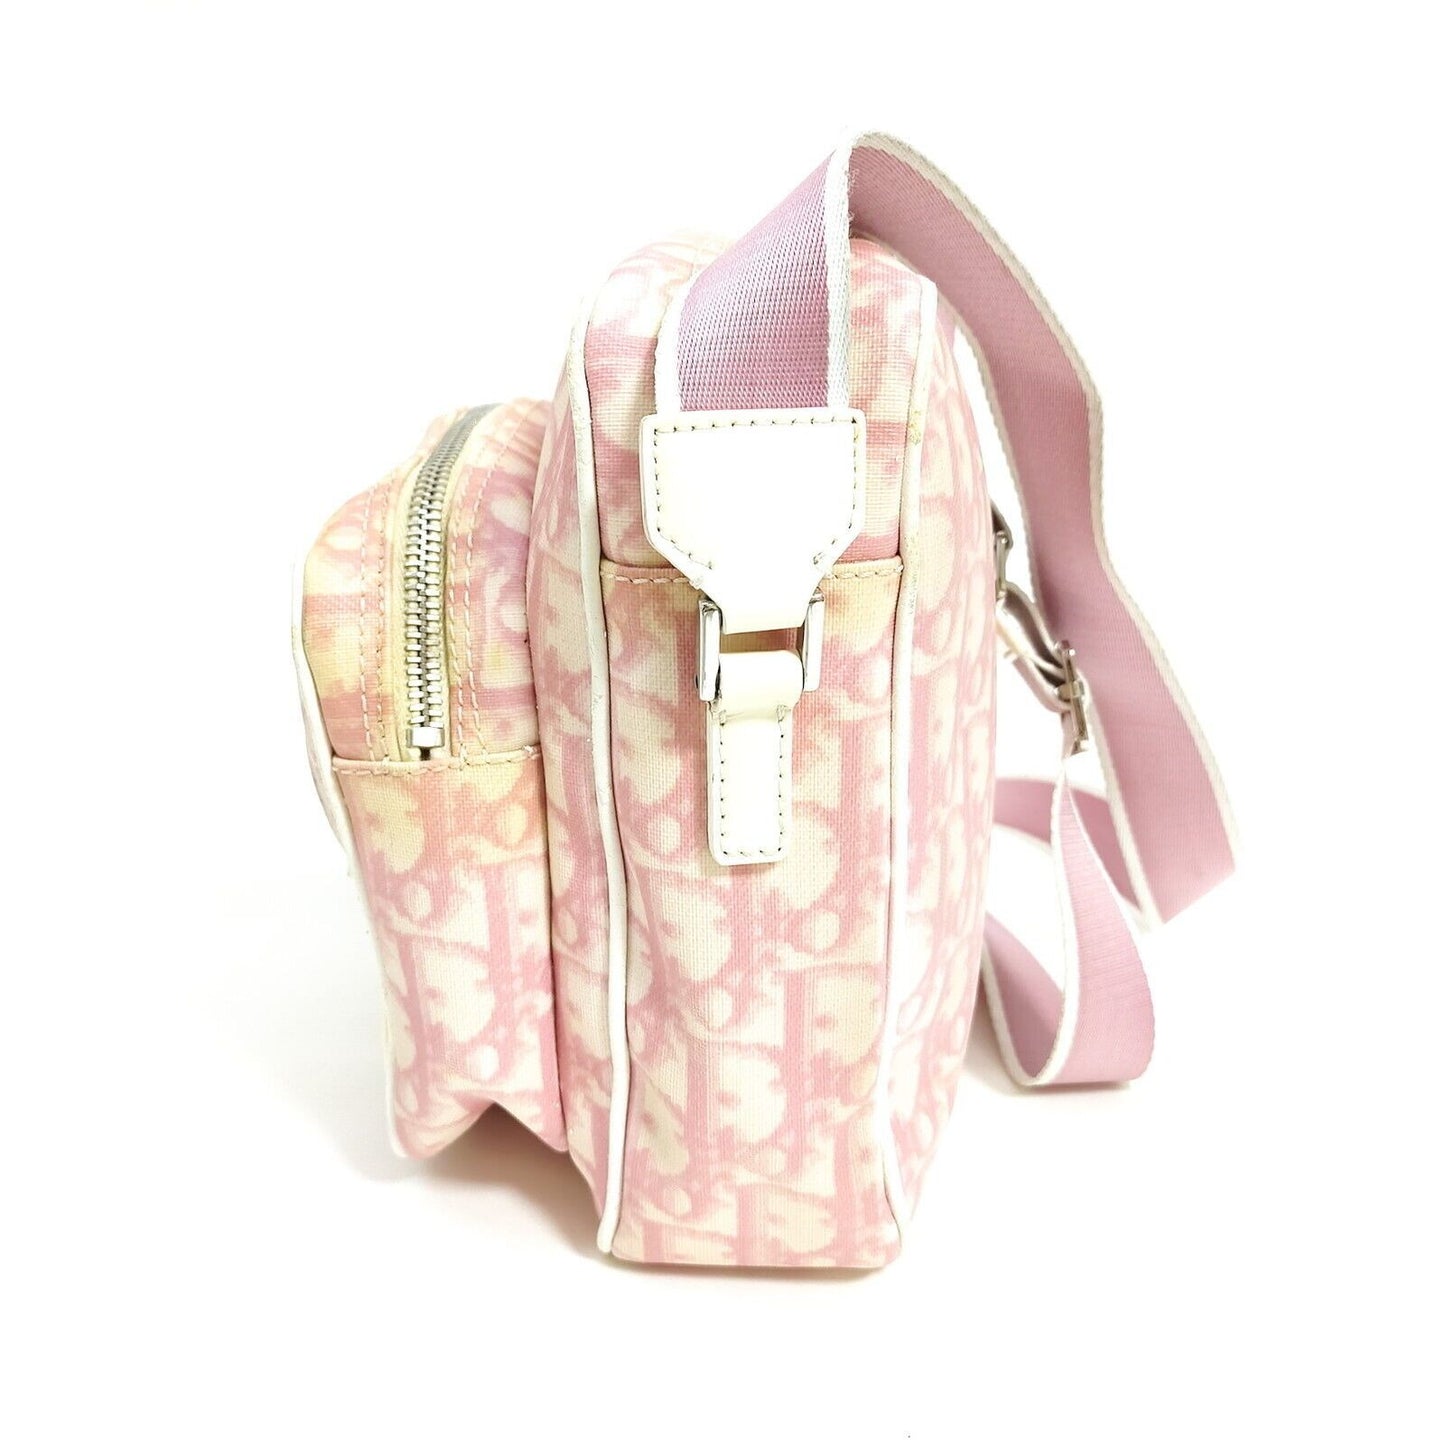 Christian Dior, pink and white trotter print canvas and white patent leather cross body with a structured, rectangular shape